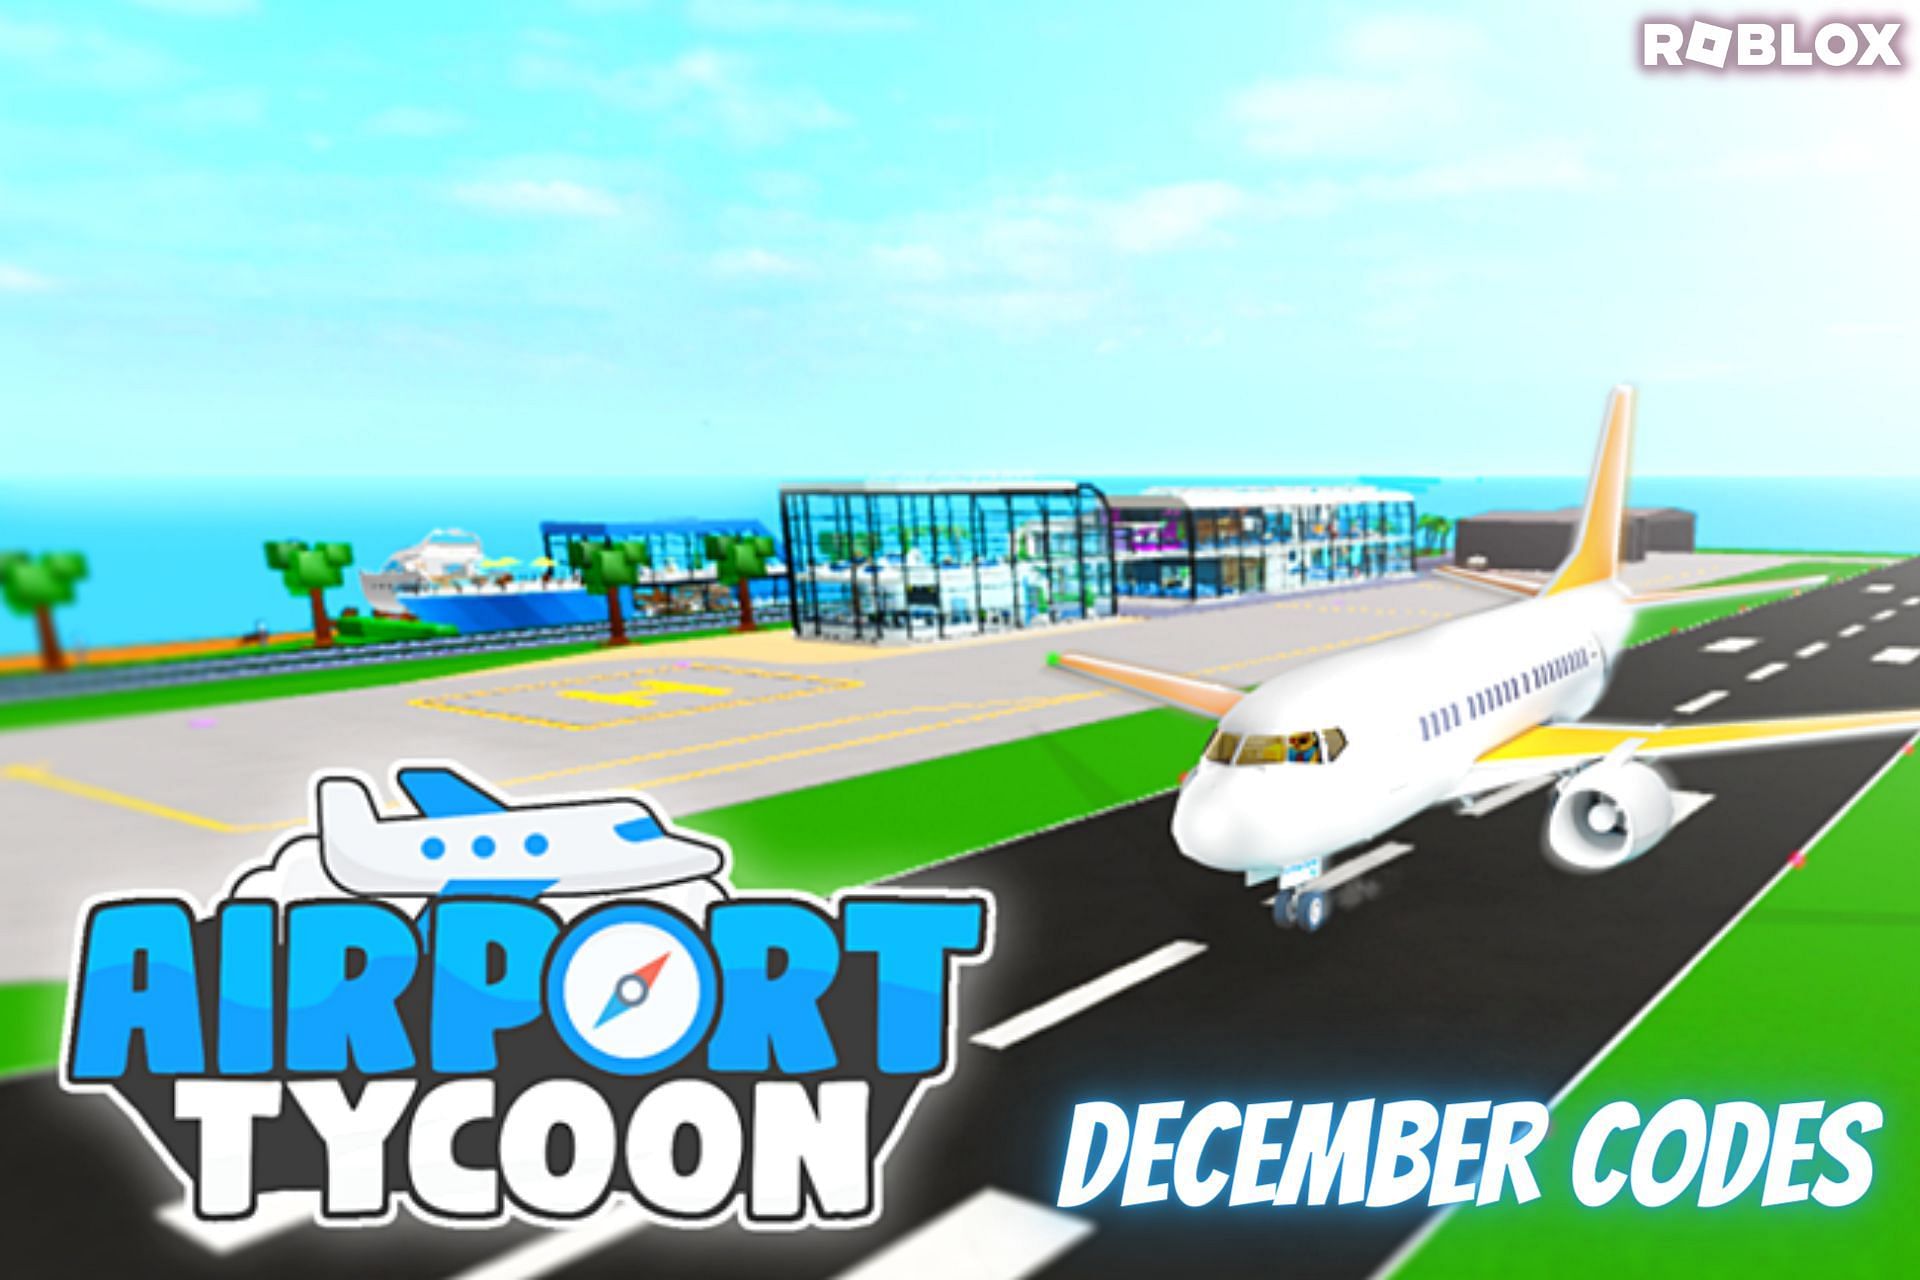 Build an airport and fly around the world (Image via Roblox)